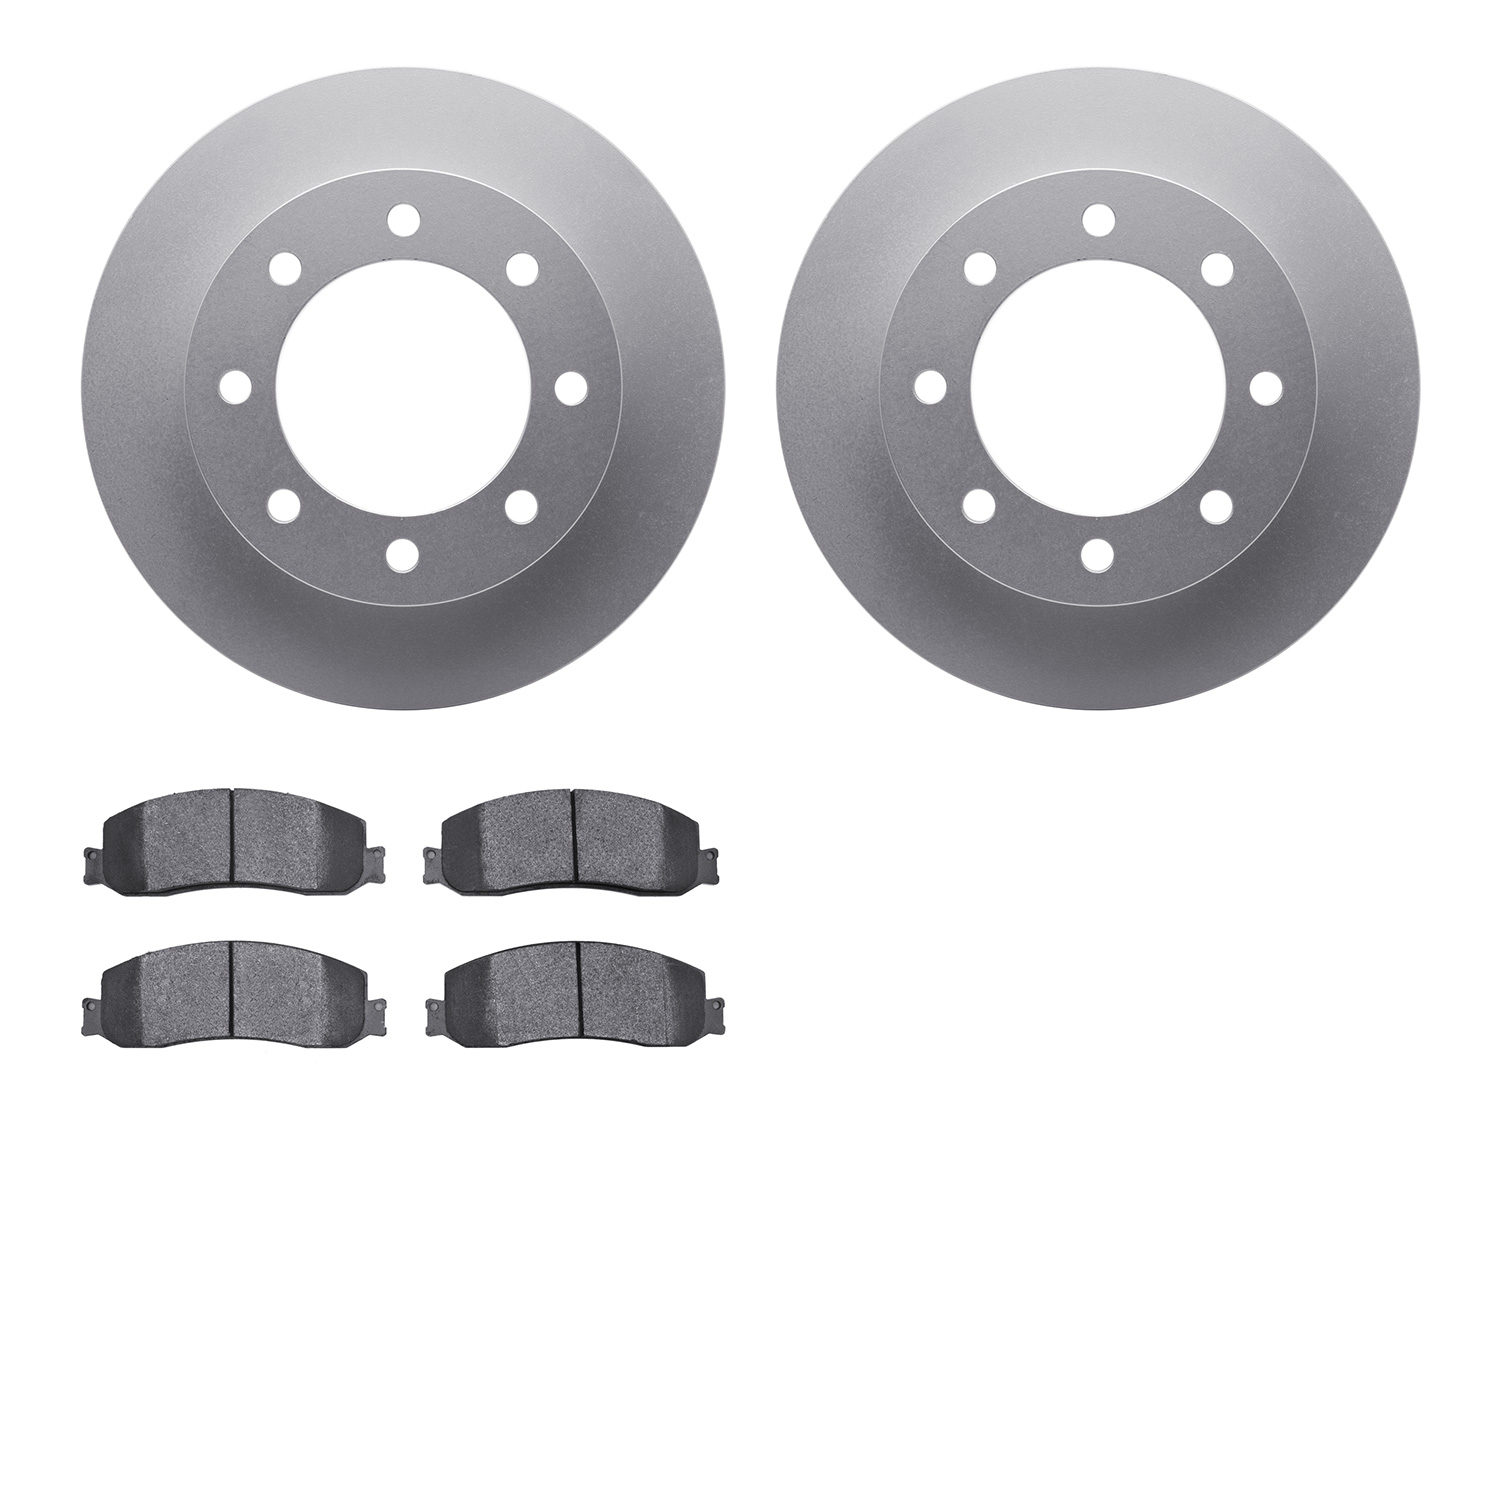 4402-54054 Geospec Brake Rotors with Ultimate-Duty Brake Pads Kit, 2010-2012 Ford/Lincoln/Mercury/Mazda, Position: Front